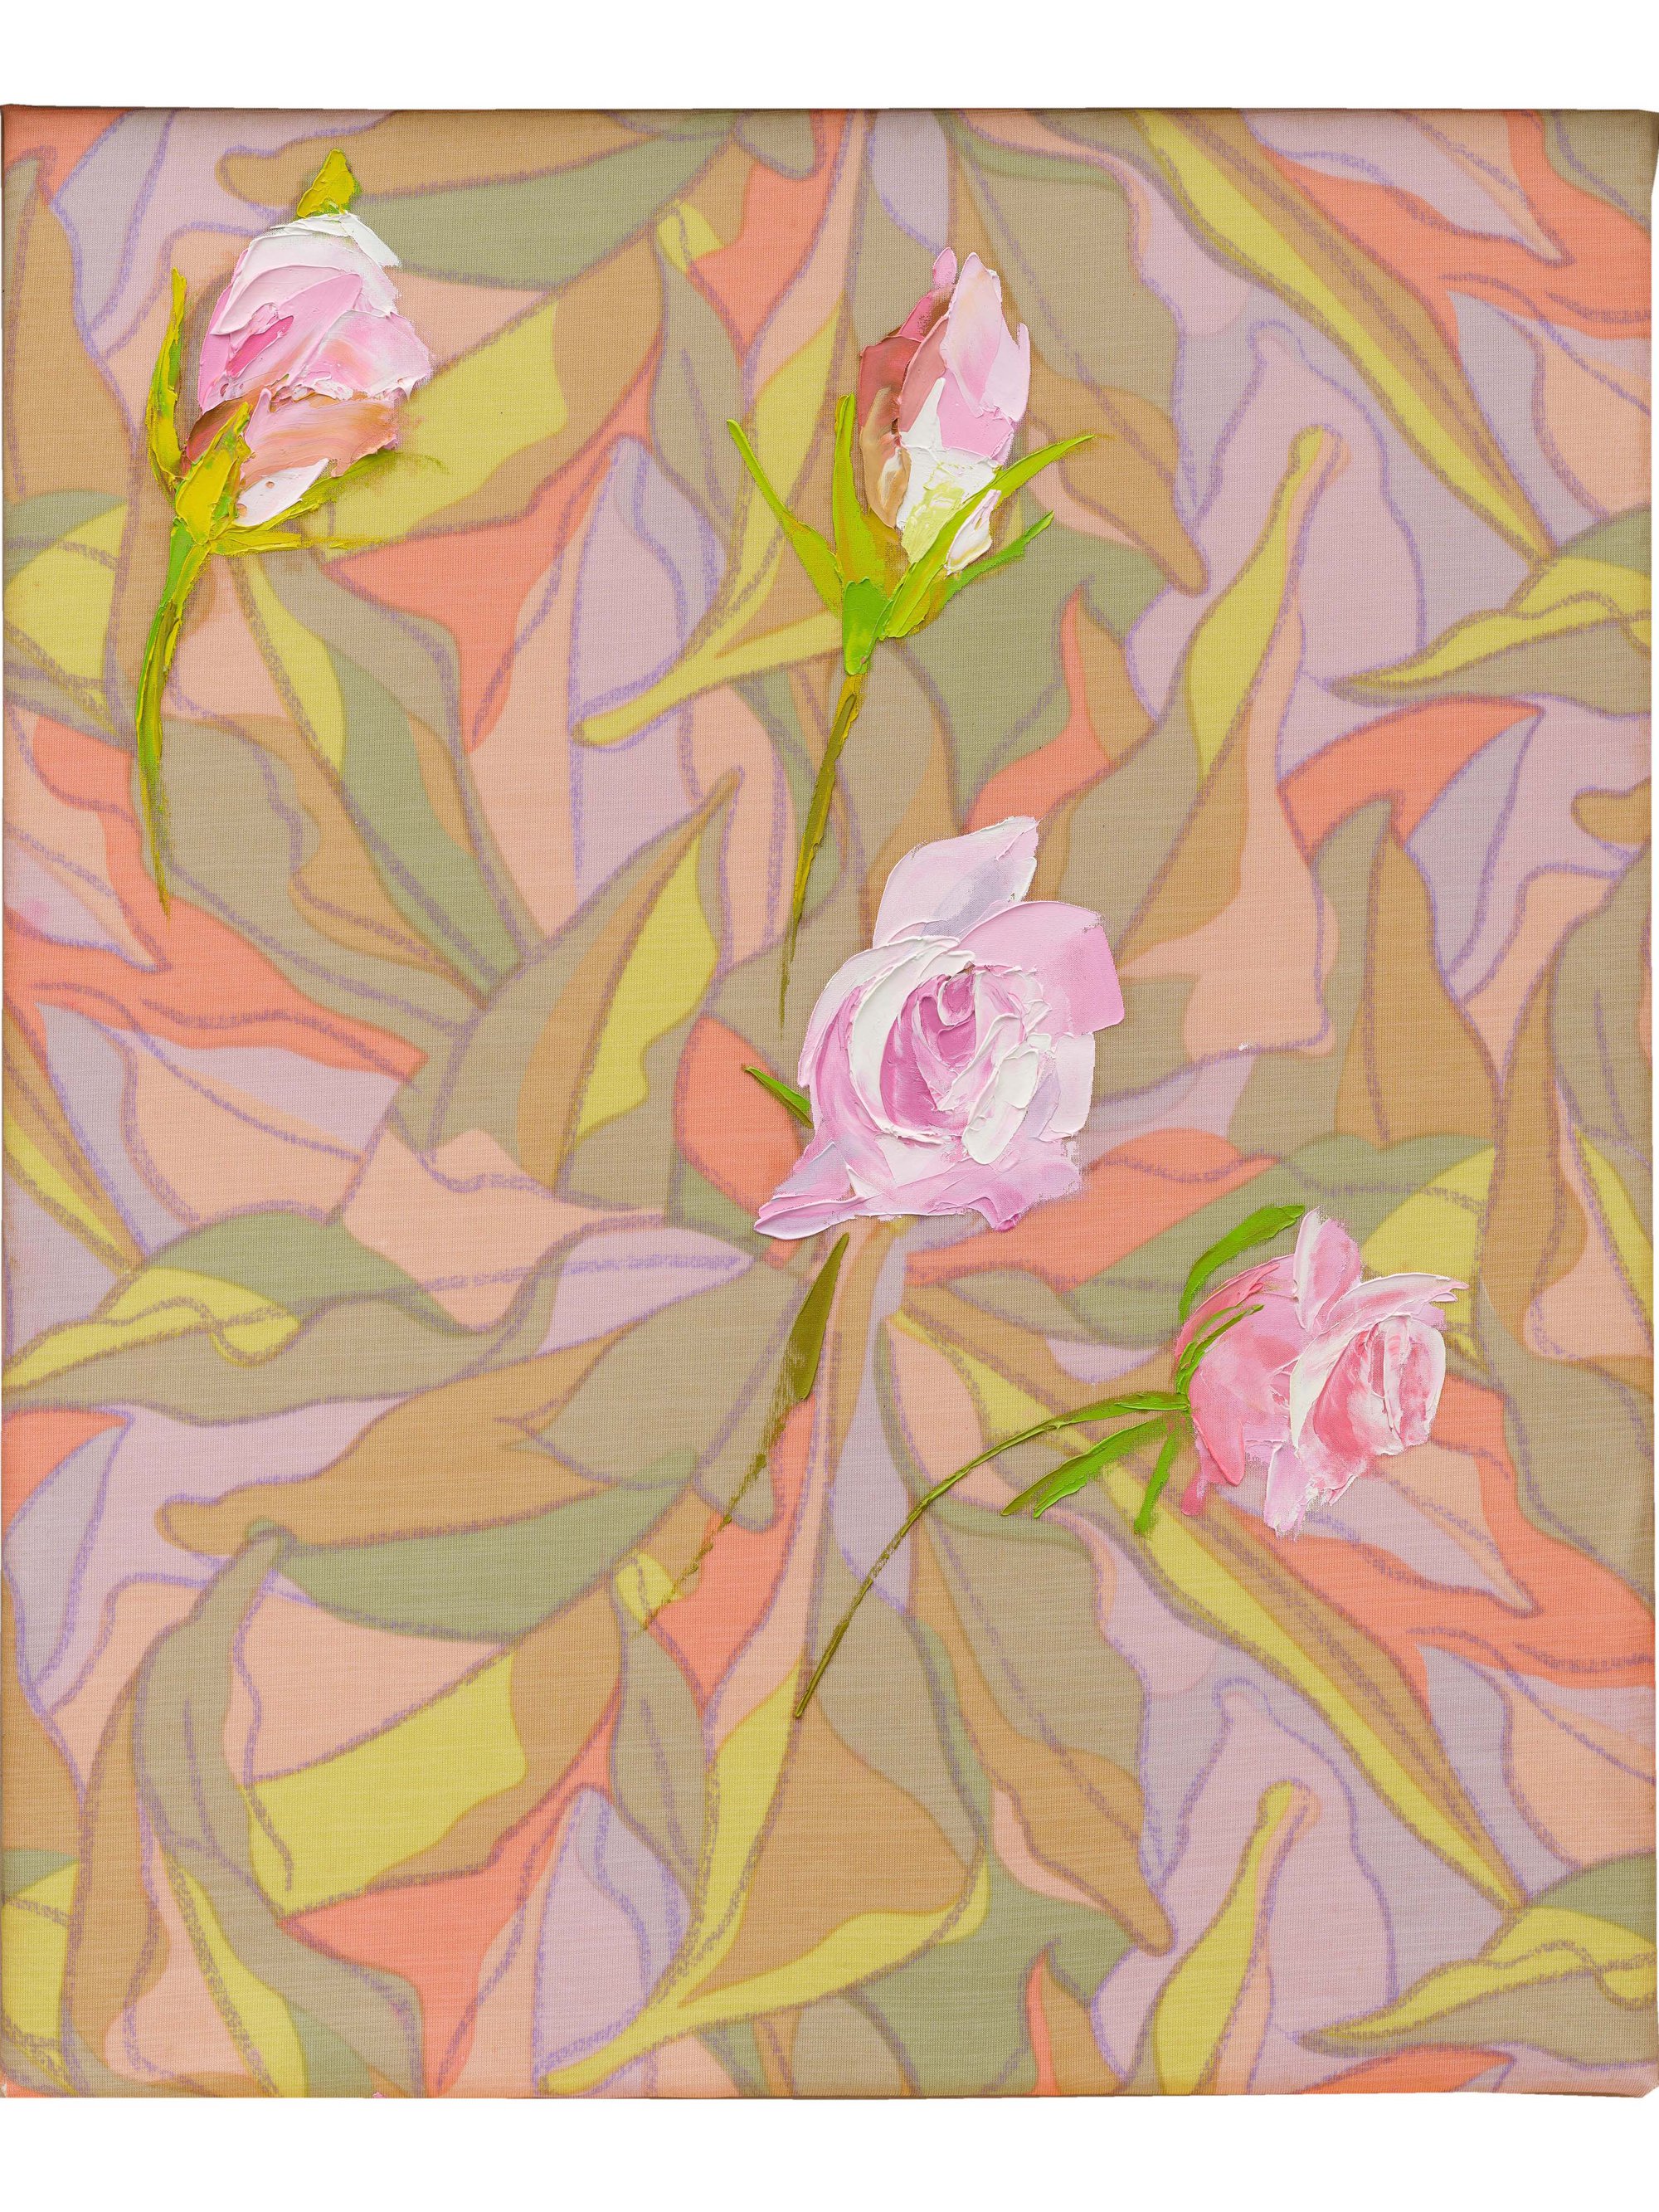 Bernat Klein, “Pink favourite” Roses, oil on screen printed knitted jersey polyester (Diolen), 65 x 57 cm, 1999